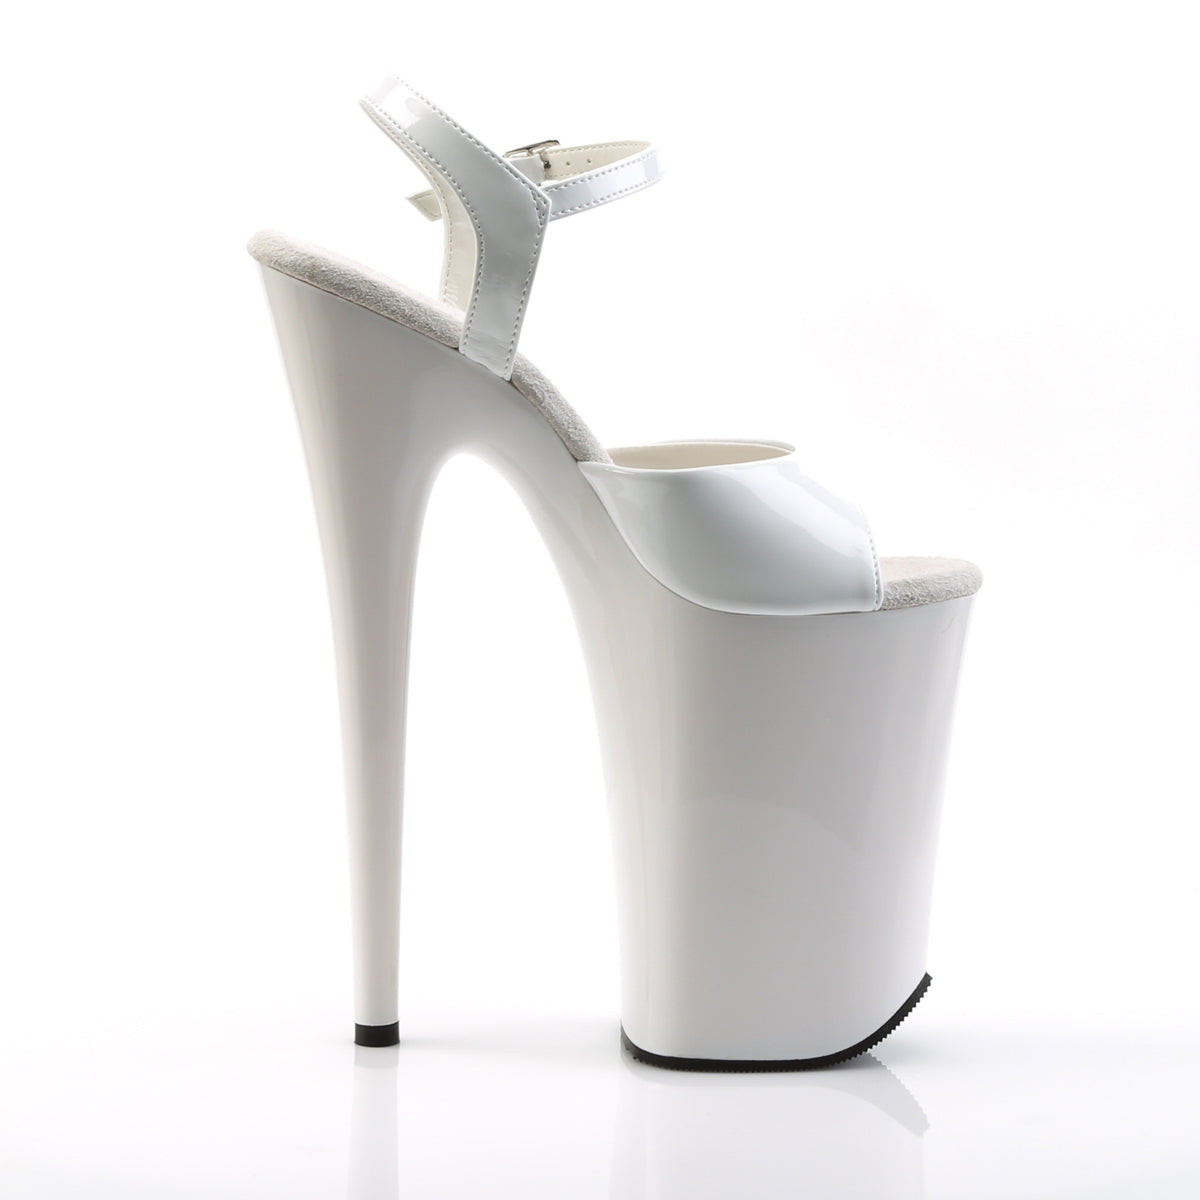 INFINITY-909 Pleaser White/White Platform Shoes [9 Inch High Heels]